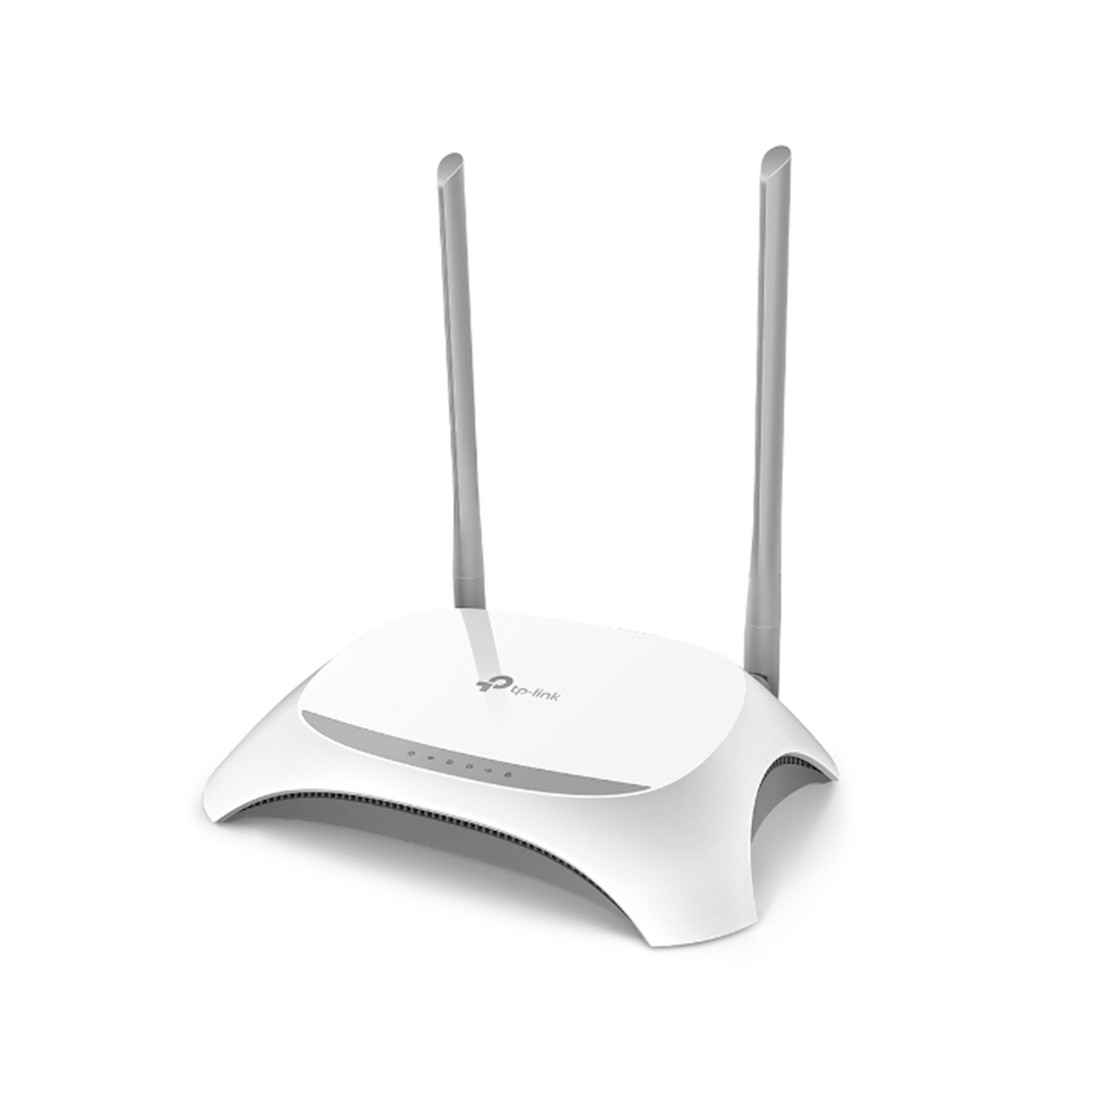 Маршрутизатор TP-Link TL-WR842N 2-004448